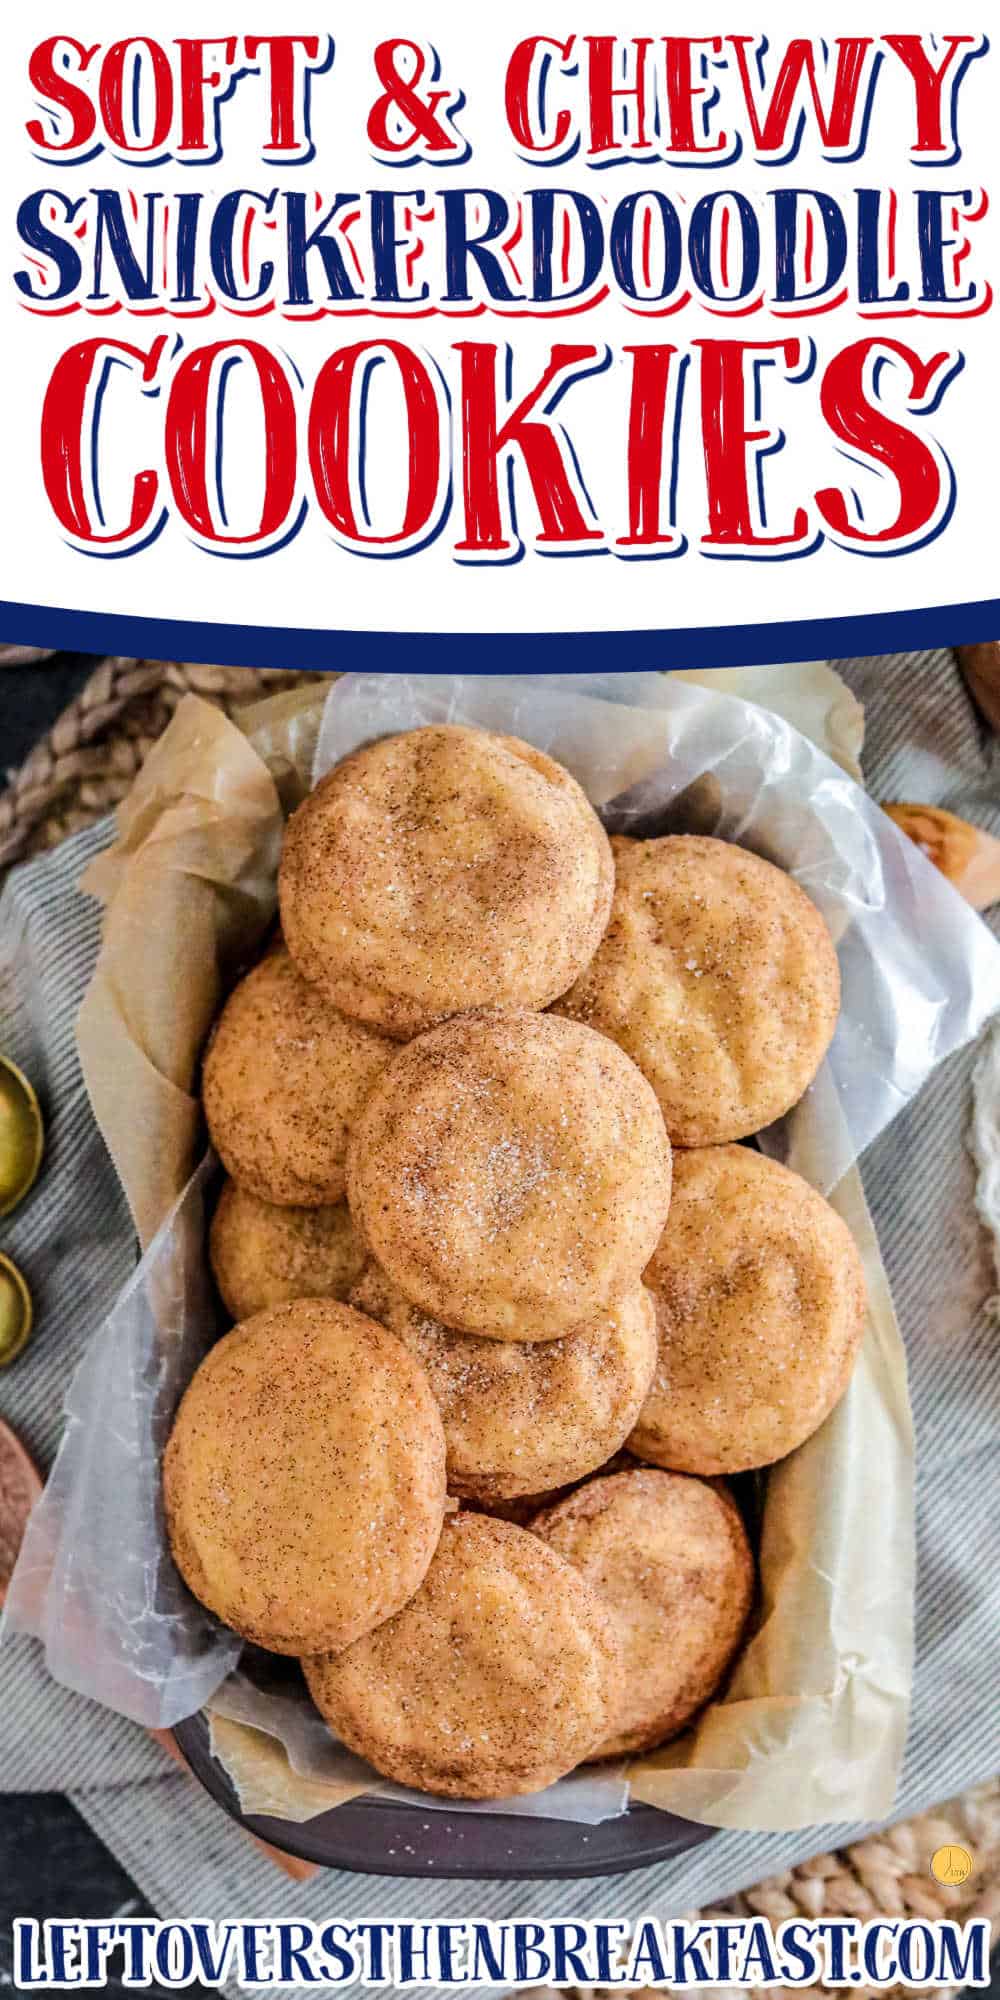 tray of cookies with text "soft & chewy snickerdoodle cookies"